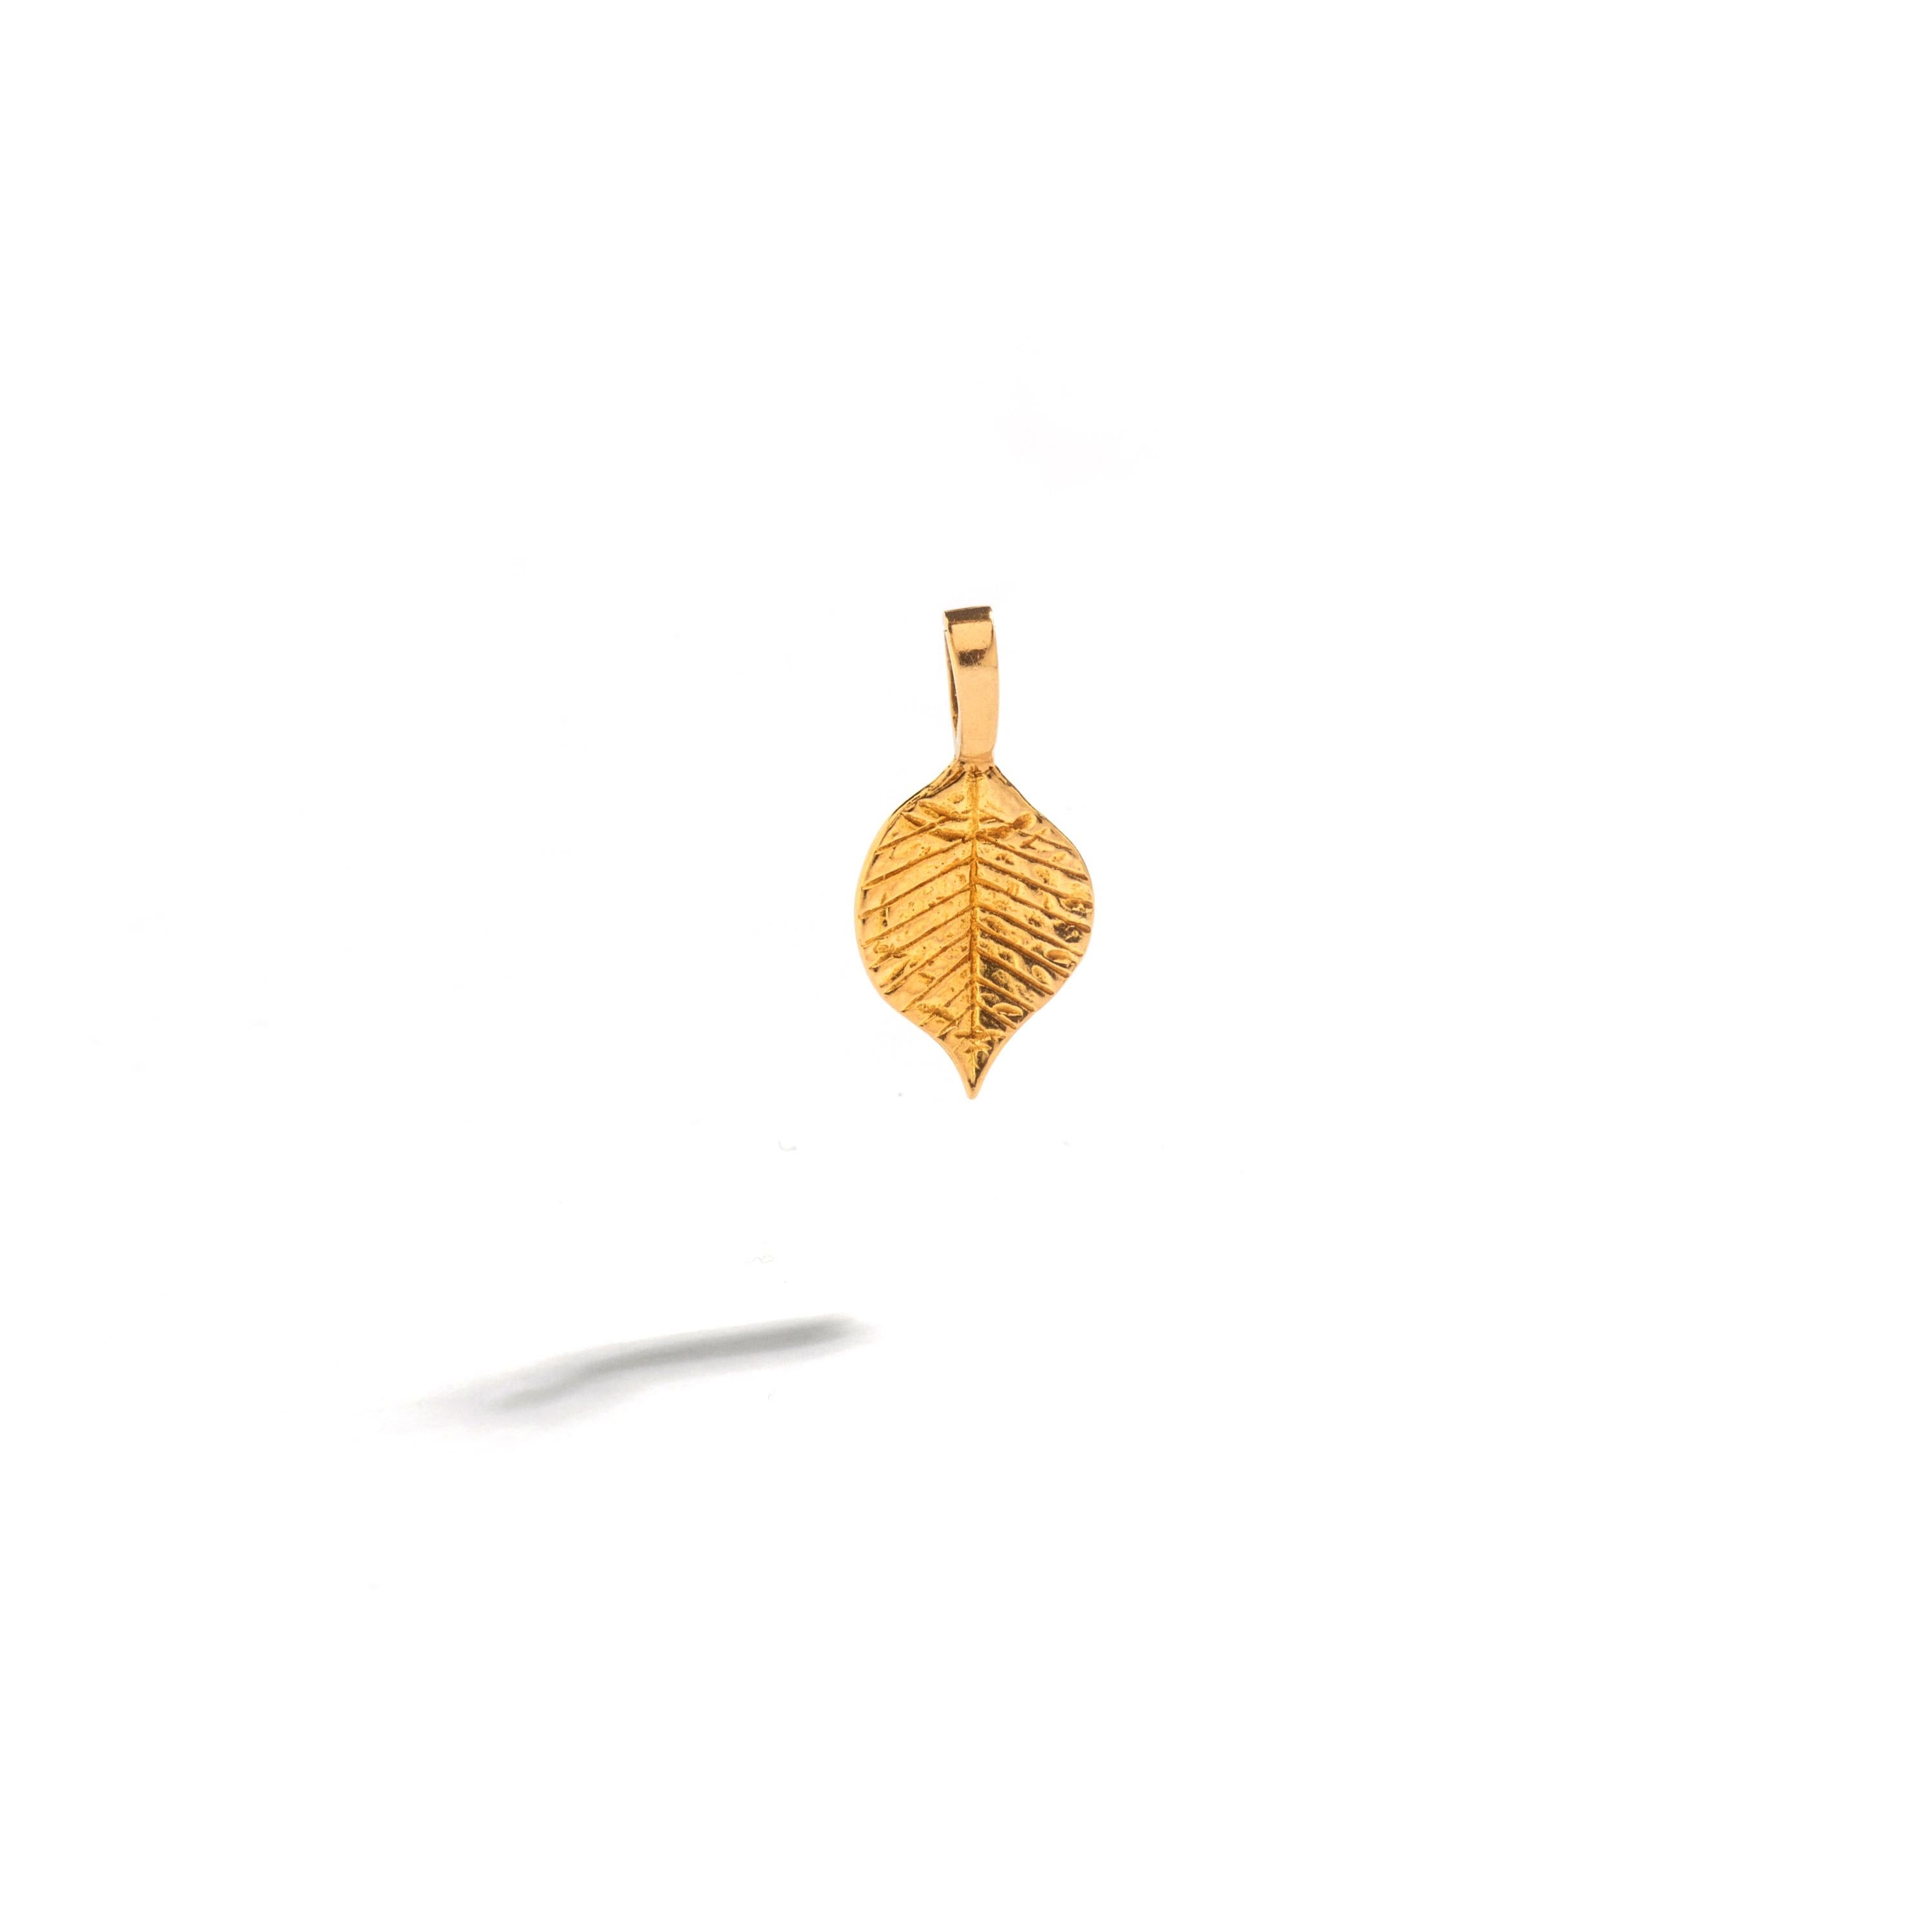 Leaf Yellow Gold 18k Pendant Charm.
Egyptian revival.

Total length: 0.79 inch (2.00 centimeters) including bail.
Total weight: 1.26 grams.